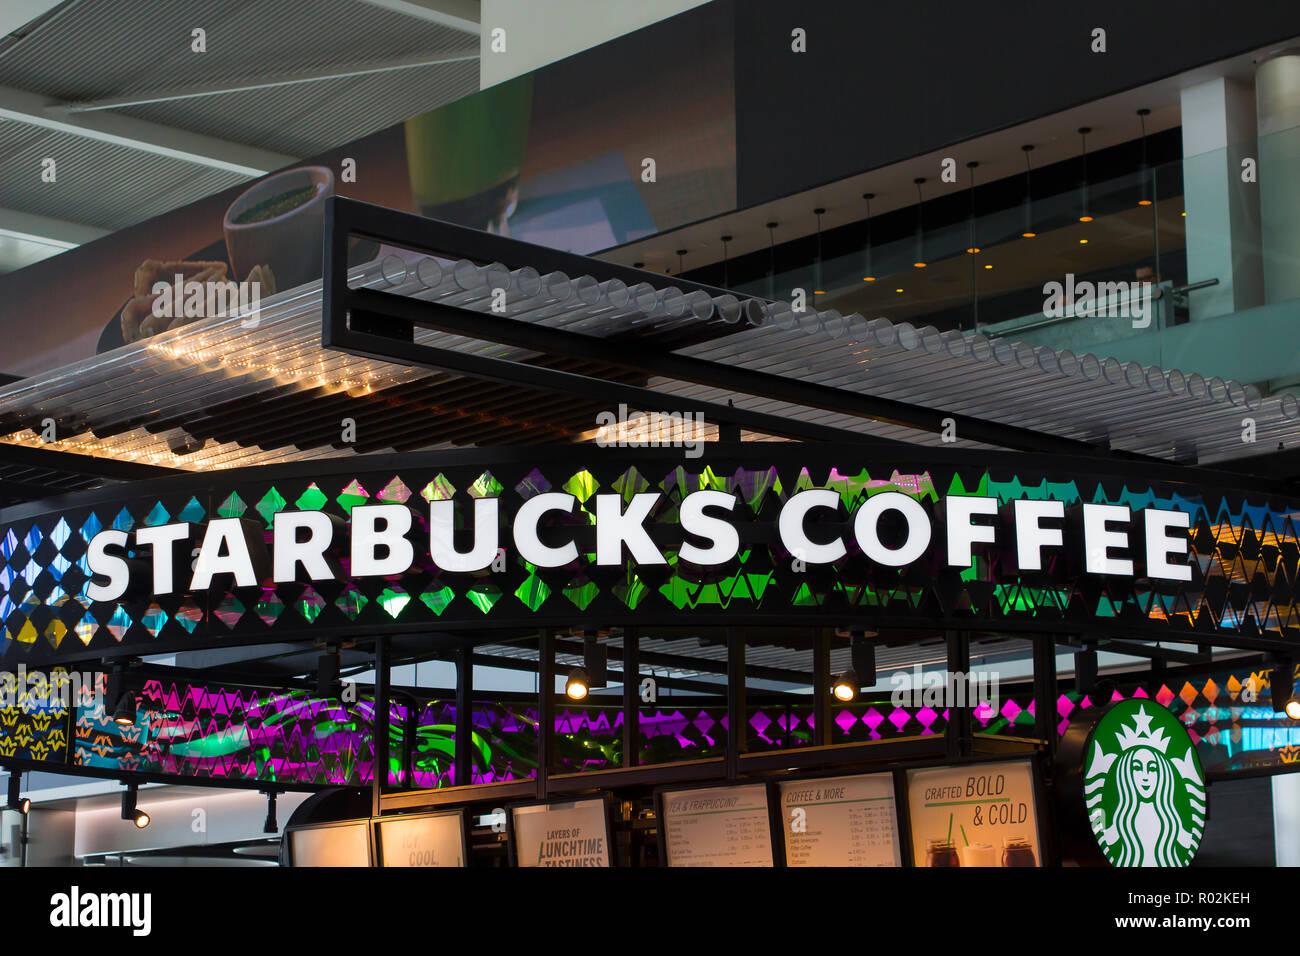 2 May 2018 A Starbucks coffee outlet with colorful overhead sign in Heathrow Airport in the modernTerminal 5 at Heathrow International Airport in Lond Stock Photo